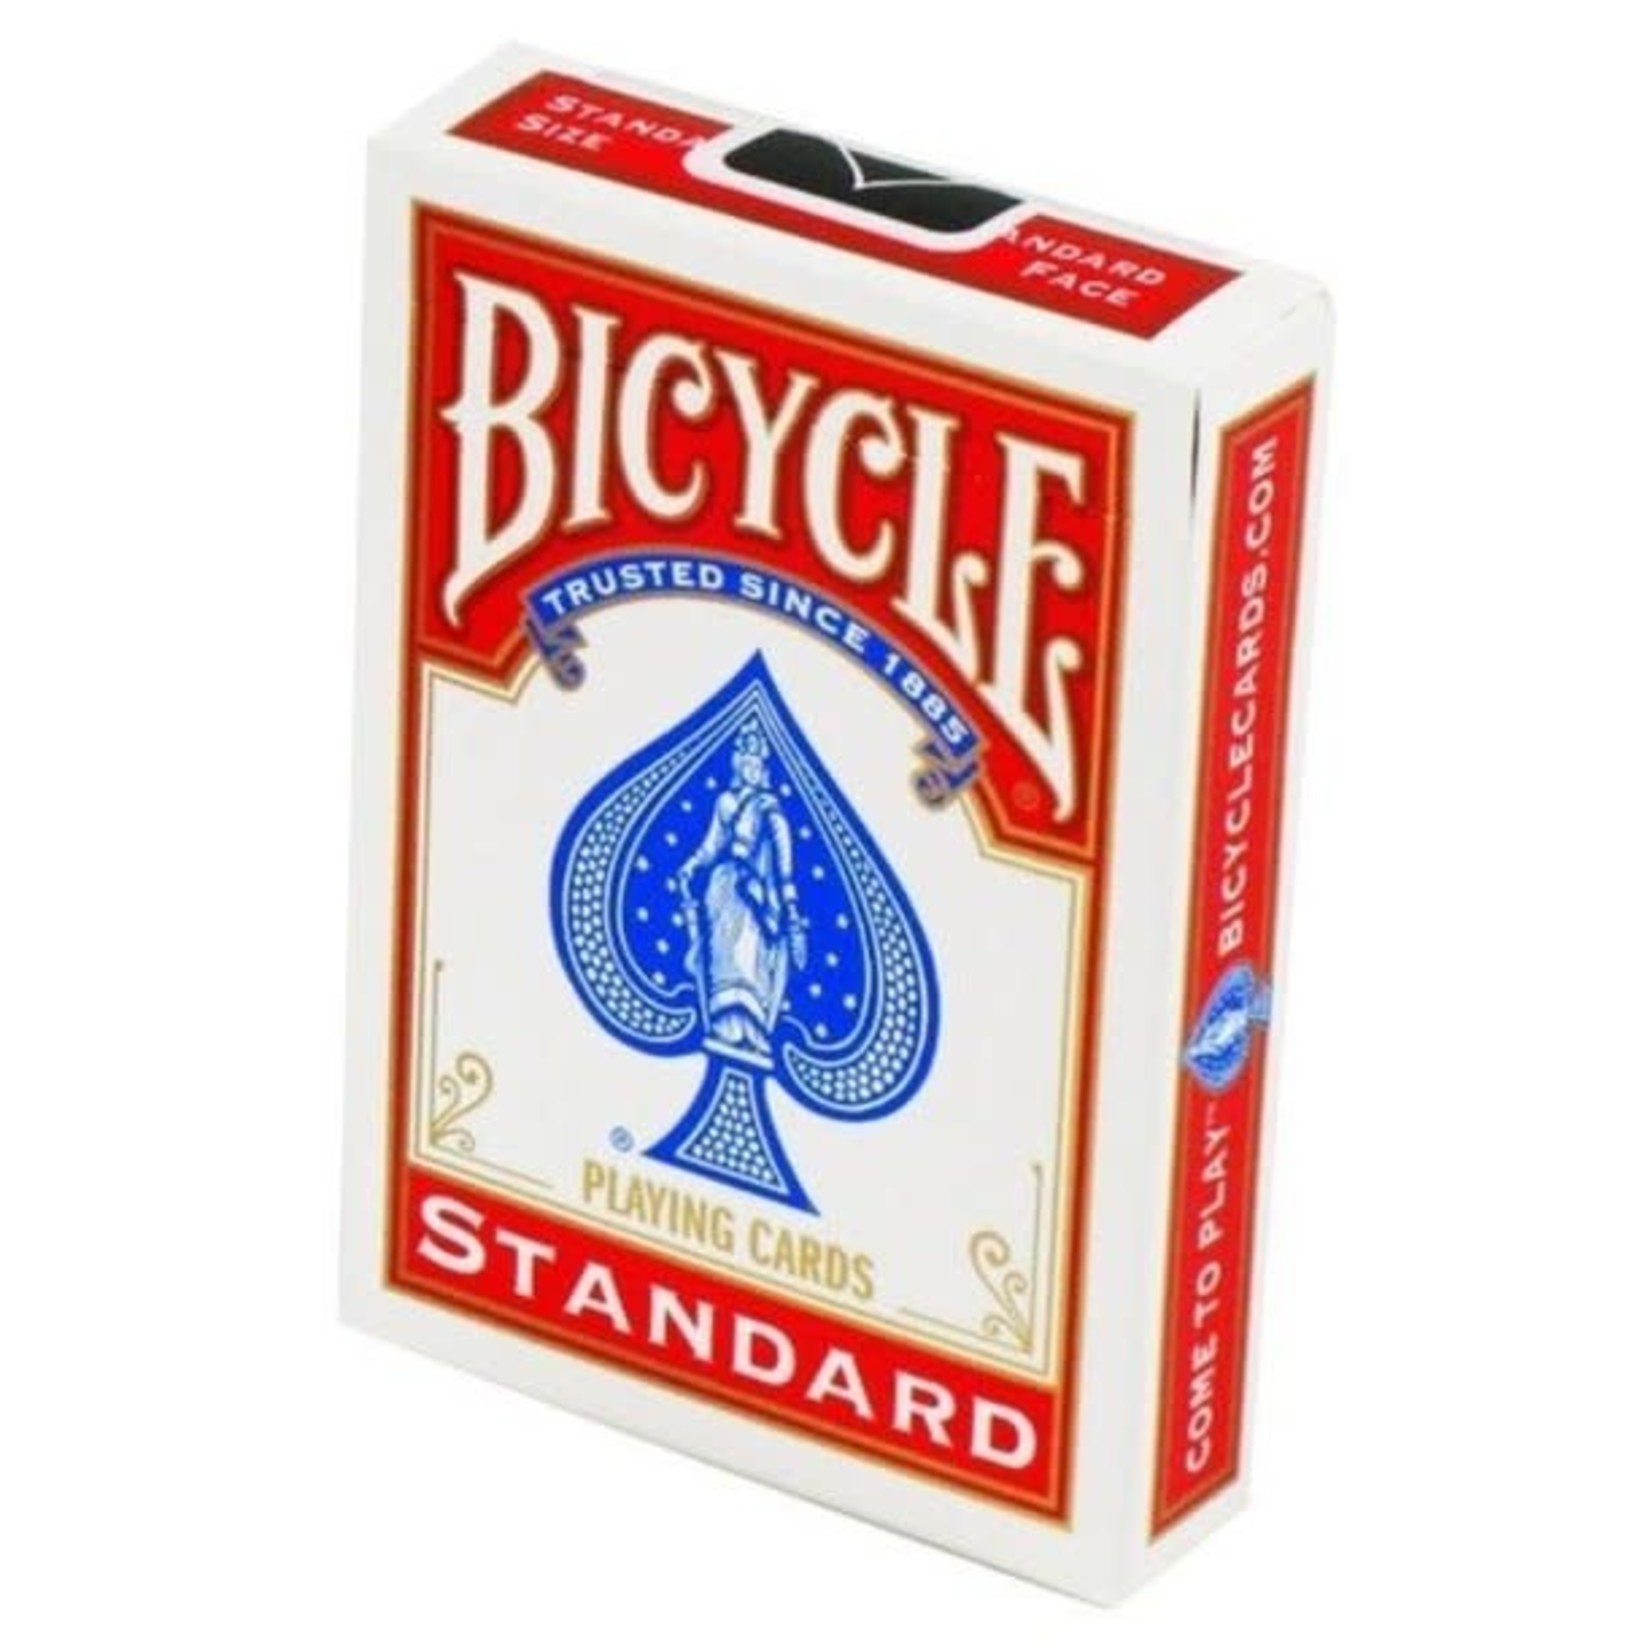 What's the difference between Bicycle Rider Back and Standard